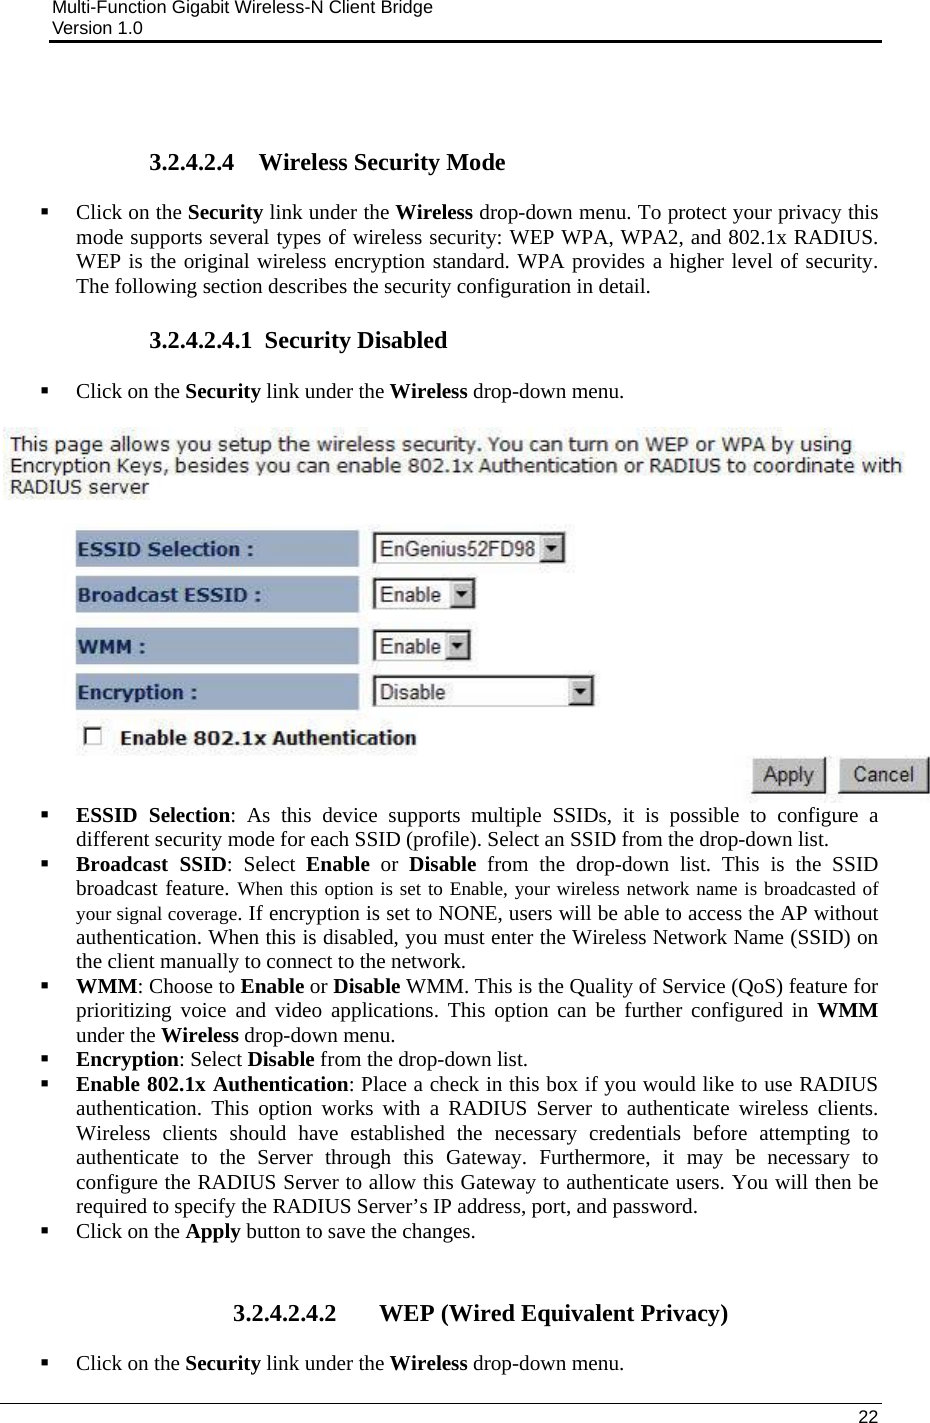 Multi-Function Gigabit Wireless-N Client Bridge                                         Version 1.0    22    3.2.4.2.4 Wireless Security Mode  Click on the Security link under the Wireless drop-down menu. To protect your privacy this mode supports several types of wireless security: WEP WPA, WPA2, and 802.1x RADIUS. WEP is the original wireless encryption standard. WPA provides a higher level of security. The following section describes the security configuration in detail.   3.2.4.2.4.1  Security Disabled  Click on the Security link under the Wireless drop-down menu.     ESSID Selection: As this device supports multiple SSIDs, it is possible to configure a different security mode for each SSID (profile). Select an SSID from the drop-down list.   Broadcast SSID: Select Enable or Disable from the drop-down list. This is the SSID broadcast feature. When this option is set to Enable, your wireless network name is broadcasted of your signal coverage. If encryption is set to NONE, users will be able to access the AP without authentication. When this is disabled, you must enter the Wireless Network Name (SSID) on the client manually to connect to the network.  WMM: Choose to Enable or Disable WMM. This is the Quality of Service (QoS) feature for prioritizing voice and video applications. This option can be further configured in WMM under the Wireless drop-down menu.   Encryption: Select Disable from the drop-down list.   Enable 802.1x Authentication: Place a check in this box if you would like to use RADIUS authentication. This option works with a RADIUS Server to authenticate wireless clients. Wireless clients should have established the necessary credentials before attempting to authenticate to the Server through this Gateway. Furthermore, it may be necessary to configure the RADIUS Server to allow this Gateway to authenticate users. You will then be required to specify the RADIUS Server’s IP address, port, and password.     Click on the Apply button to save the changes.    3.2.4.2.4.2 WEP (Wired Equivalent Privacy)  Click on the Security link under the Wireless drop-down menu.  